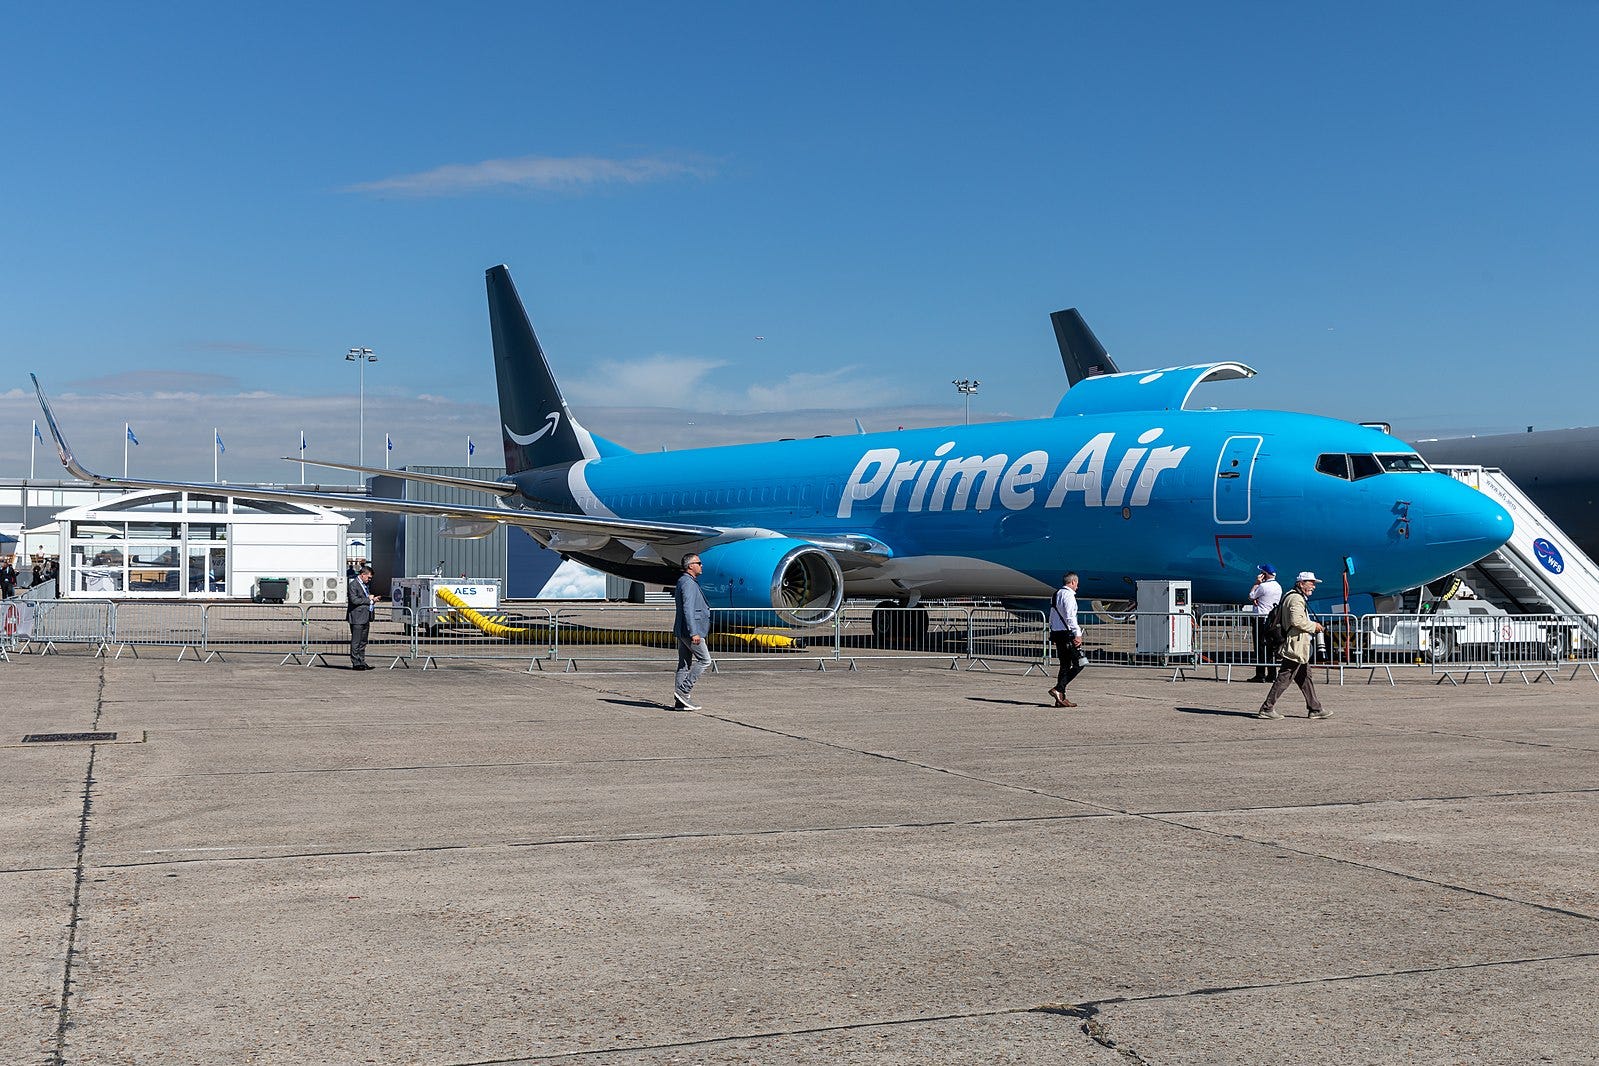 Aircraft Prices, E-Commerce Conditions Are Ripe For Amazon Air, Says Bullish BofA